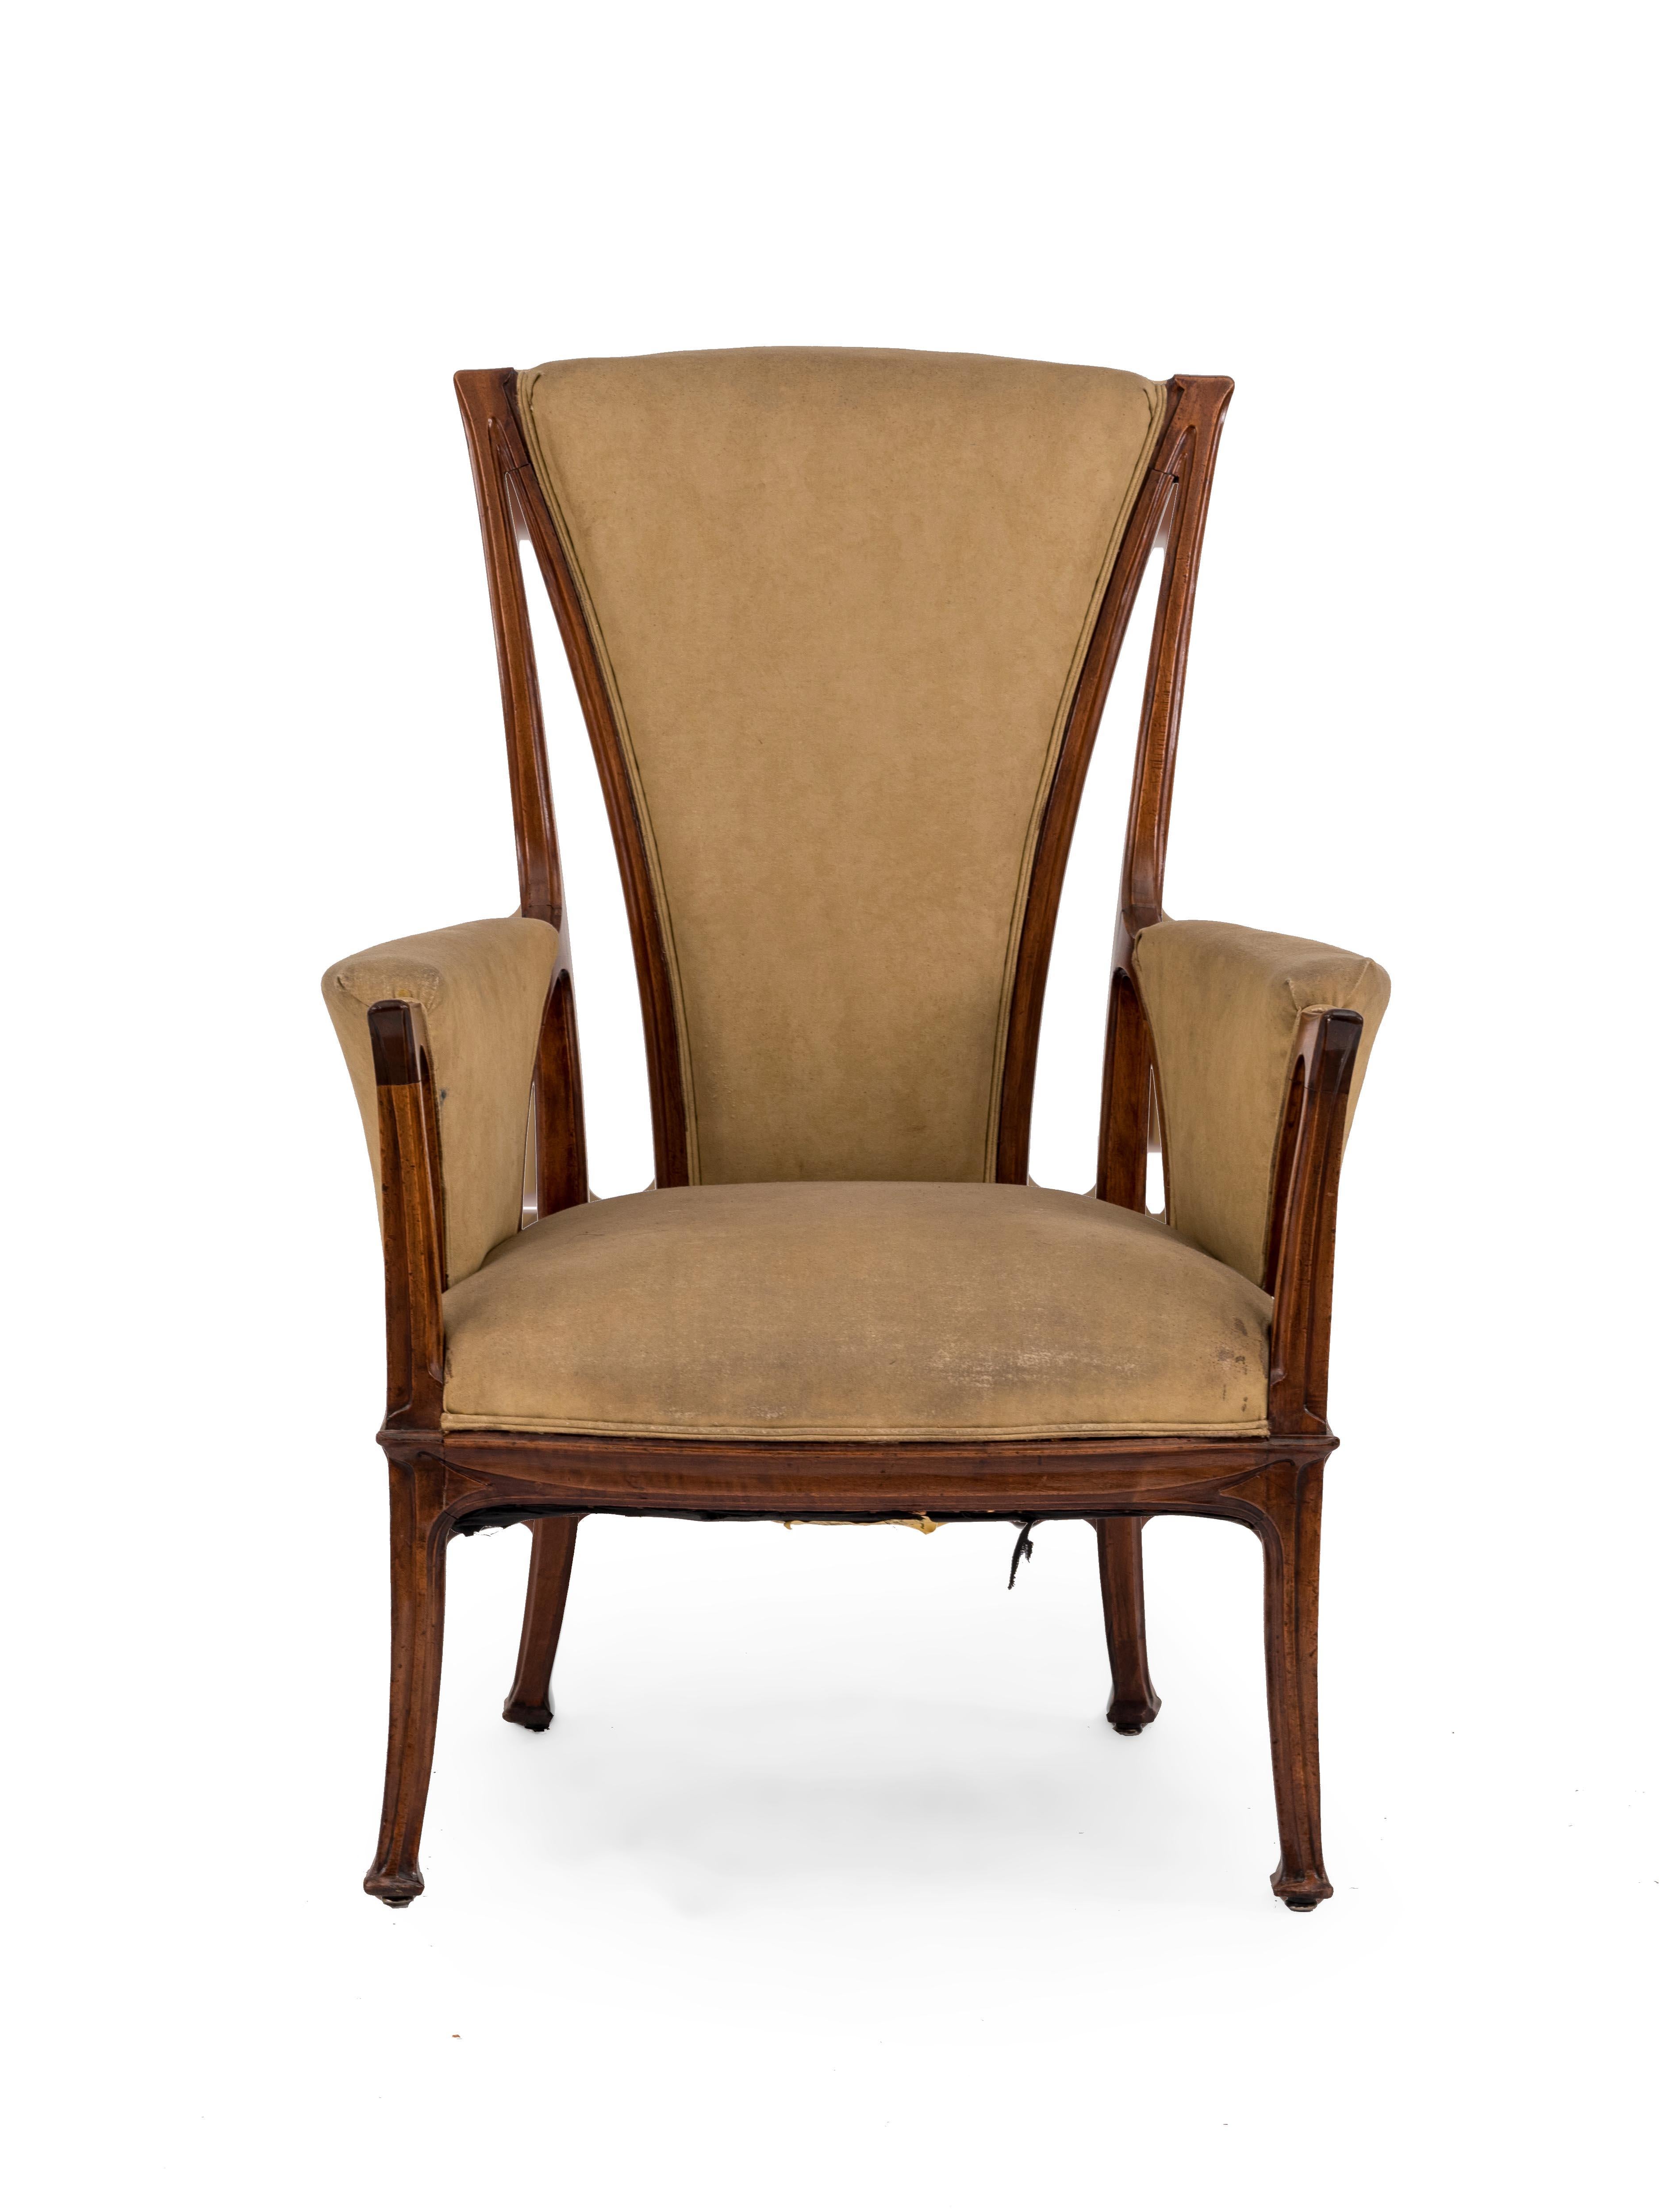 French Art Nouveau walnut high back bergere arm chair with brown velvet upholstery
